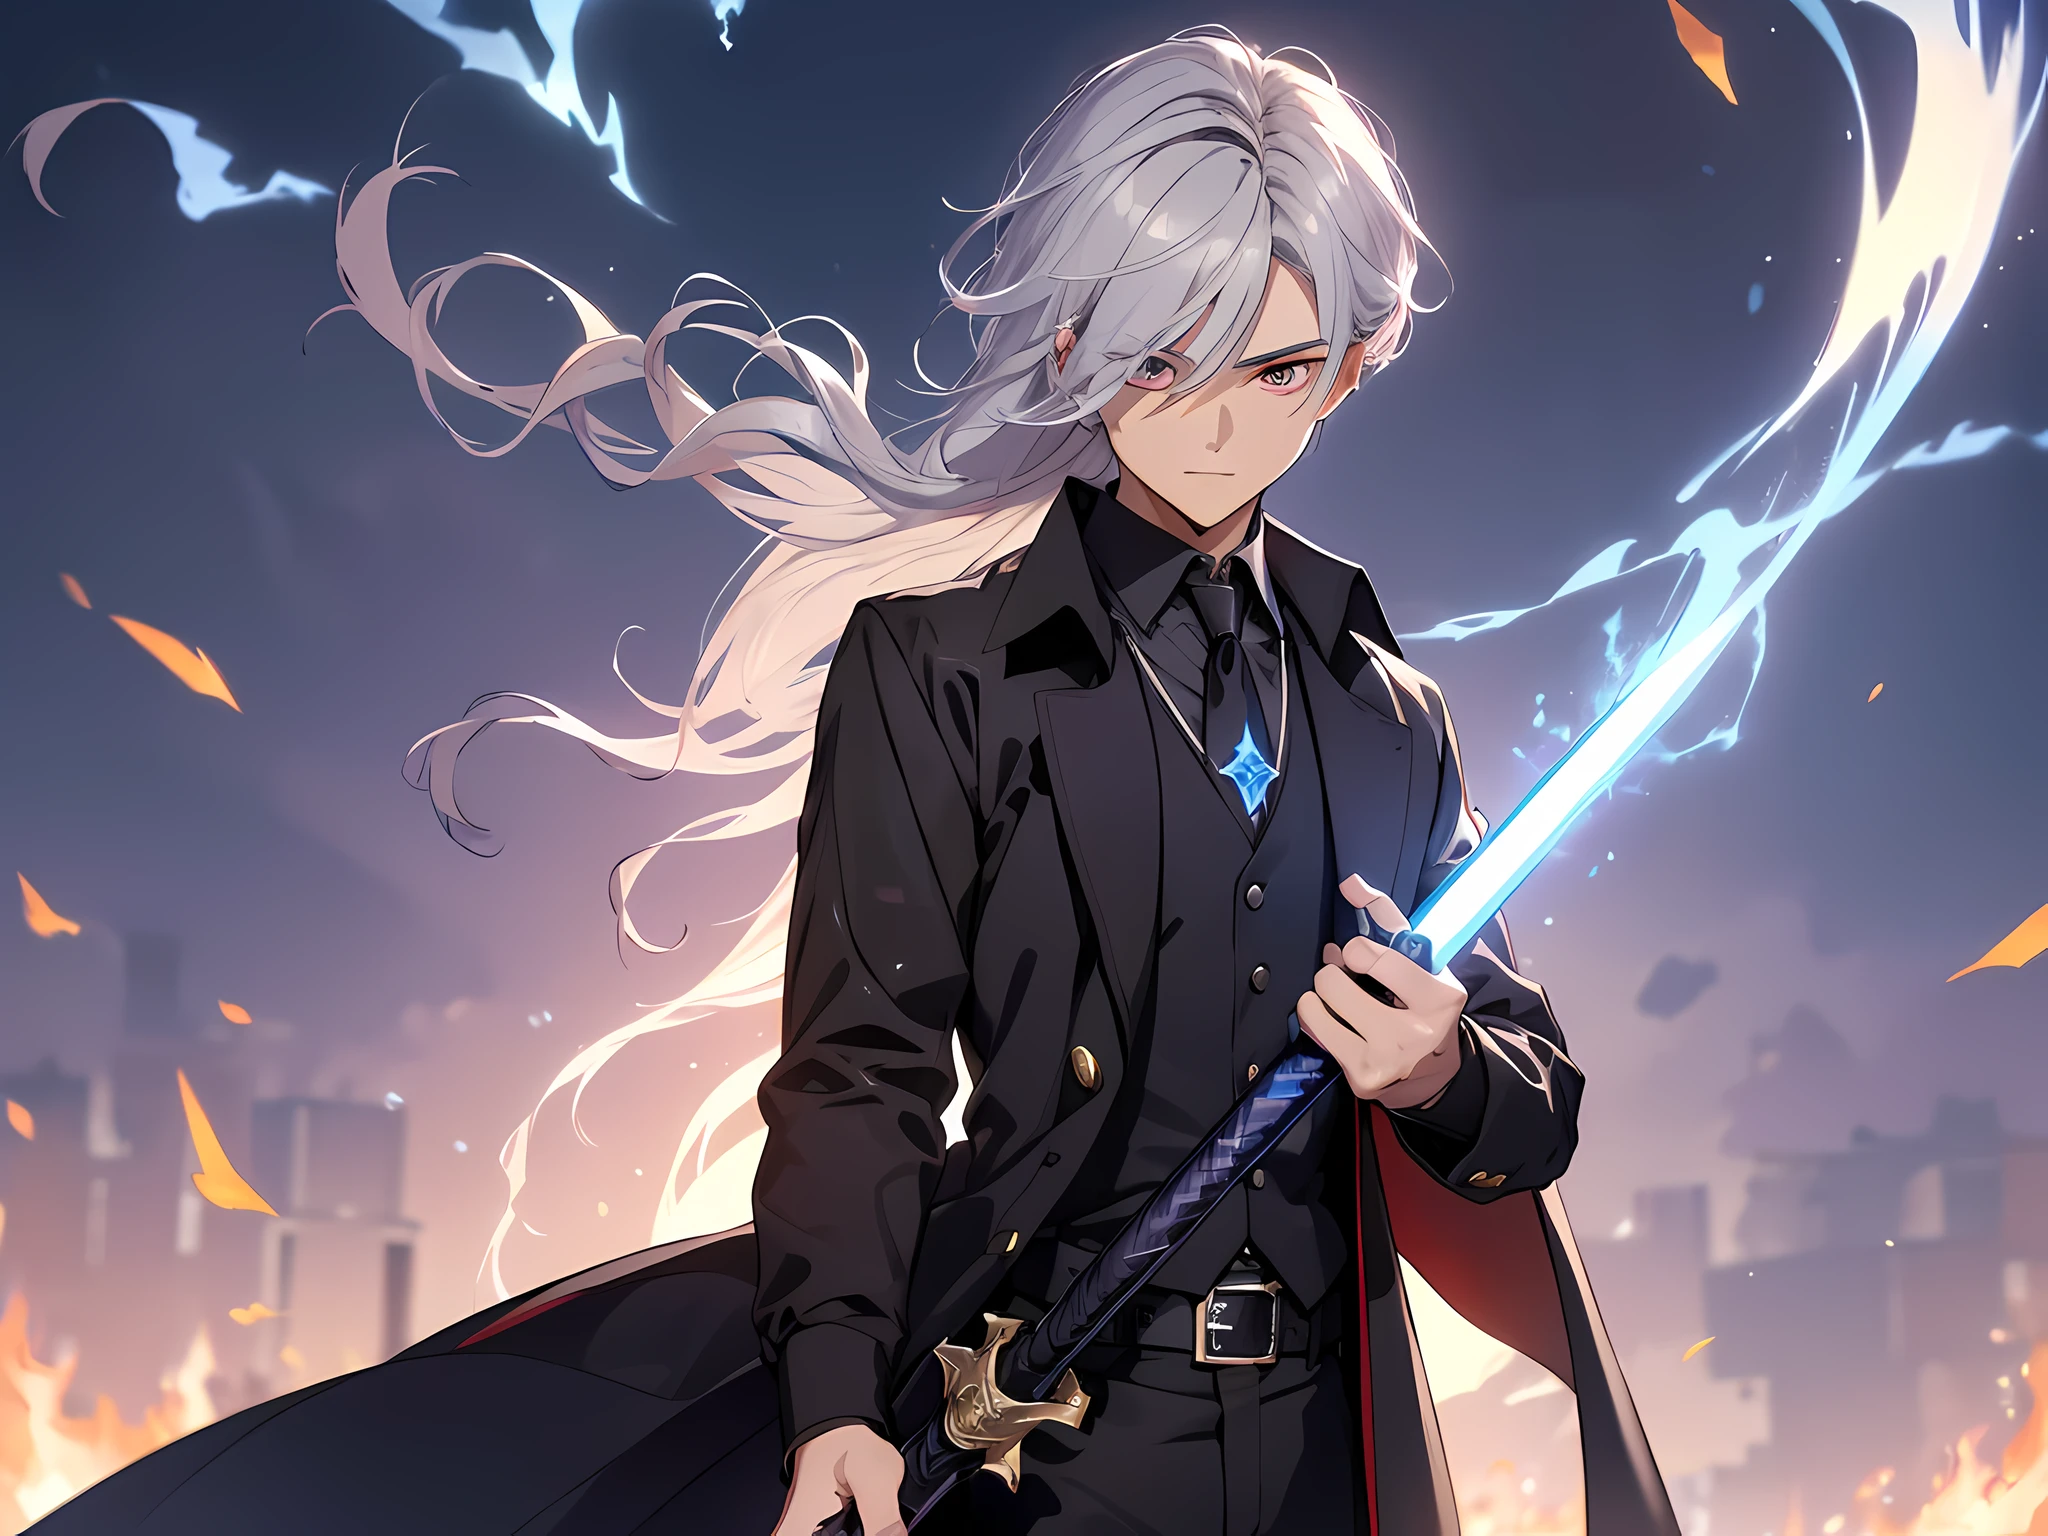 (ultra-detailed, perfect pixel, highres, best quality, beautiful eyes finely detailed), 19 years old anime boy, short raven hair, wavy hair, parted bangs, gray hair, gradient hair color, there is many blue lightning swirling around his body, showing his over power aura, dangerous, he holding a magical sword, magus, red eyes, long black coat, black shirt, ((neckwear, long tie)), black skirt, aristocrat, noble attire, beautiful, ethereal, elegant, prestigious, realistic fire, the background is full of magical particles and realistic blue fire. Ray tracing.